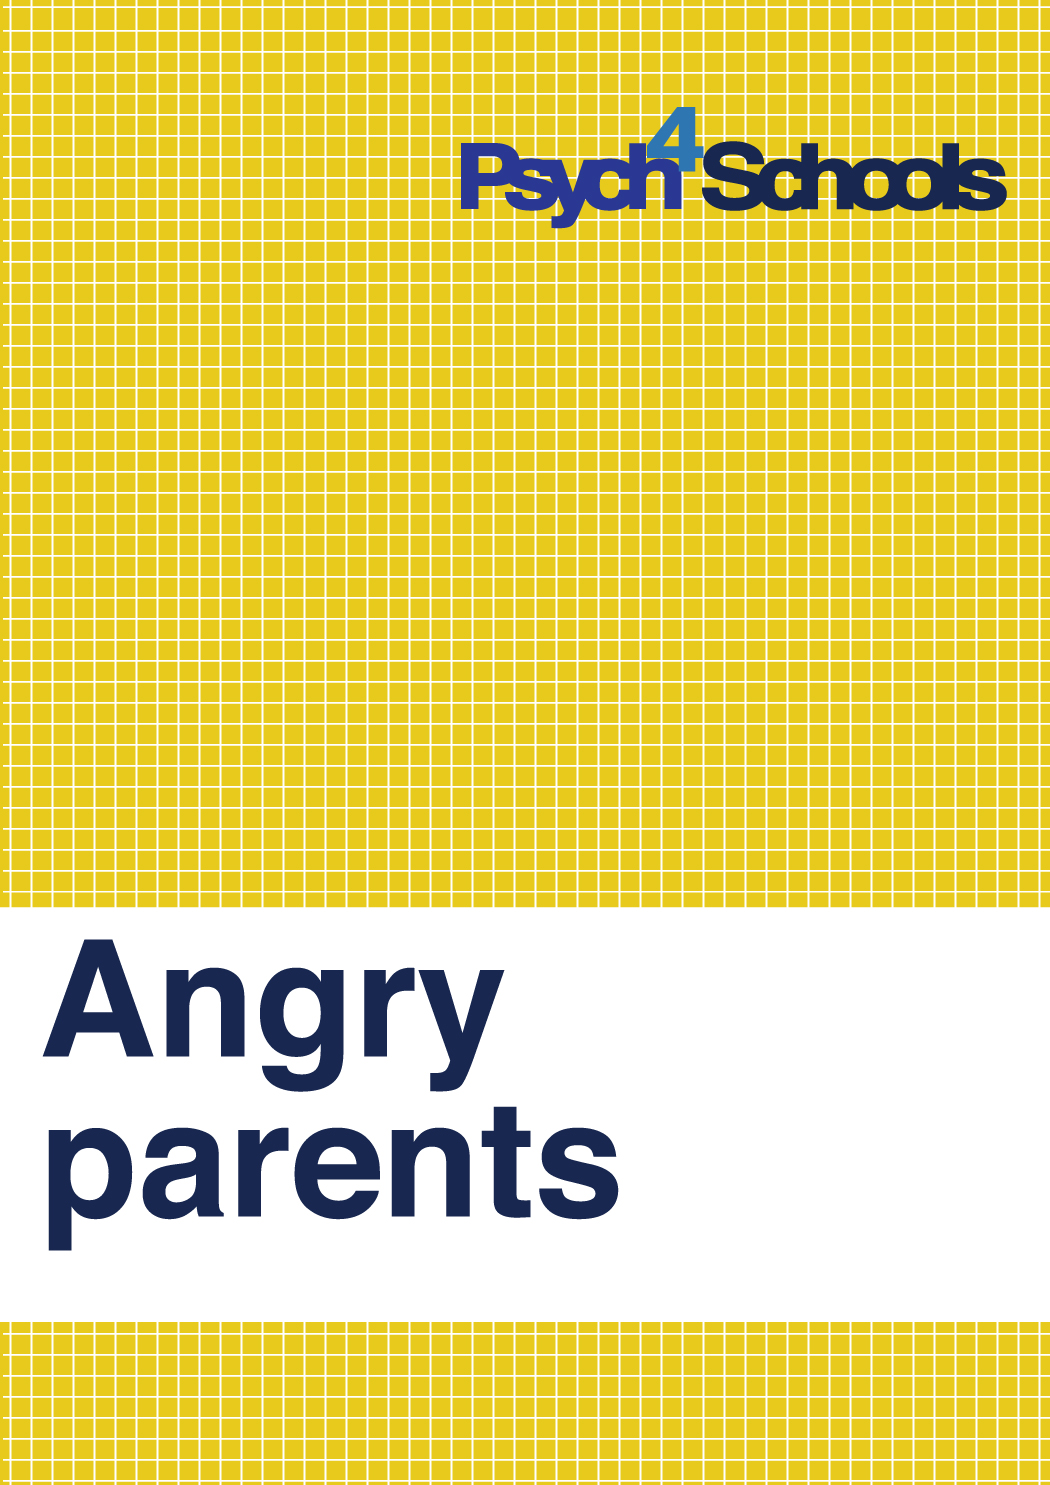 Angry parents